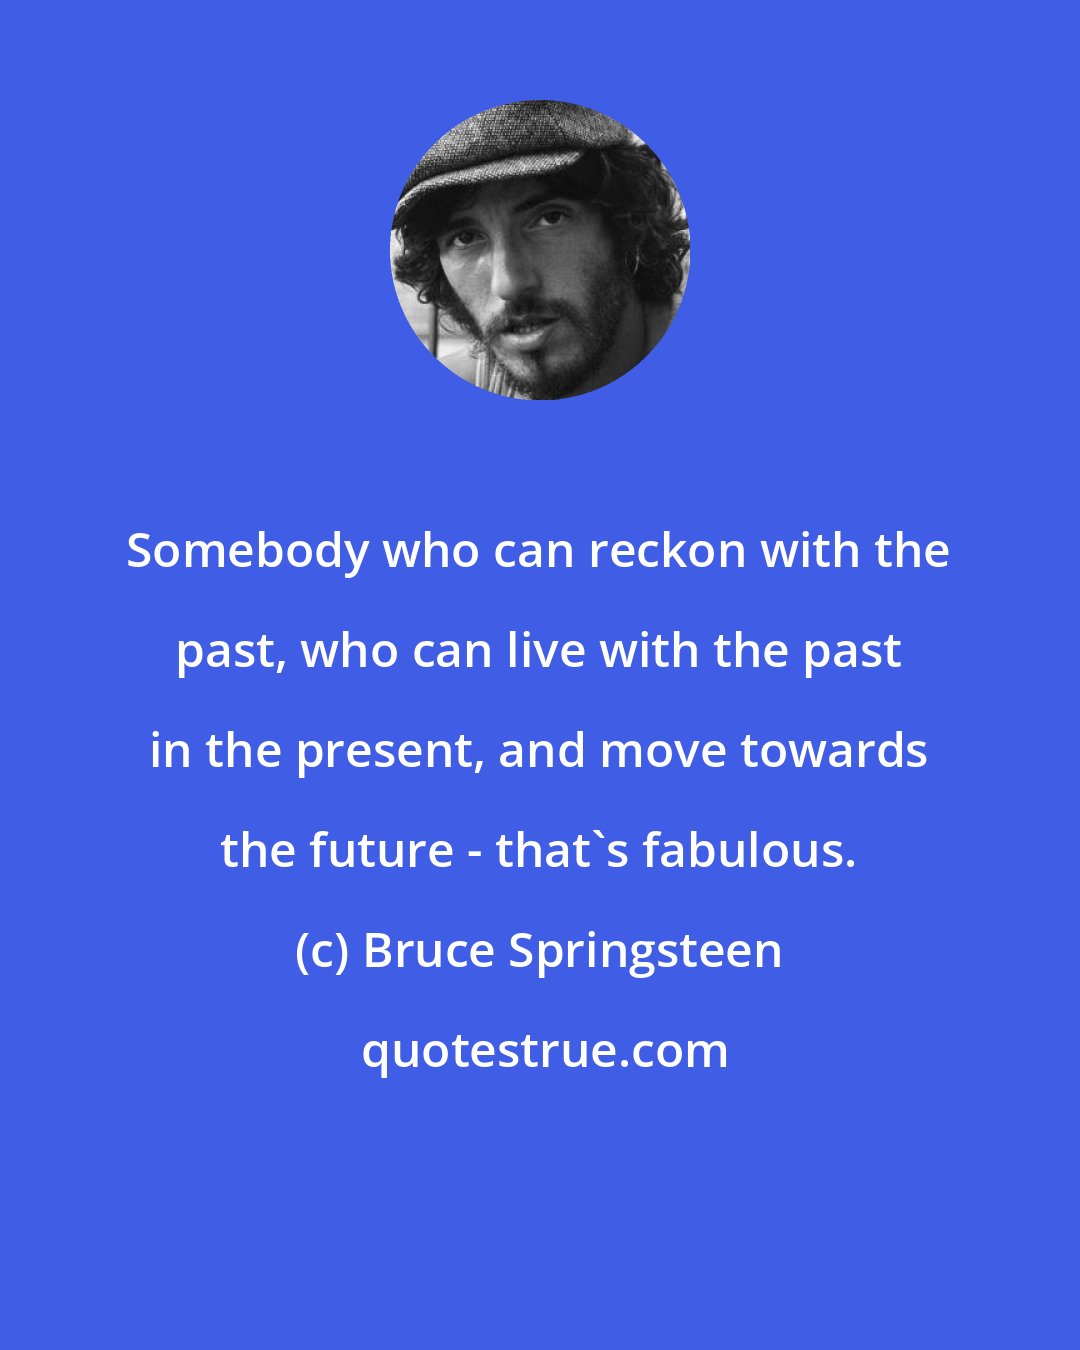 Bruce Springsteen: Somebody who can reckon with the past, who can live with the past in the present, and move towards the future - that's fabulous.